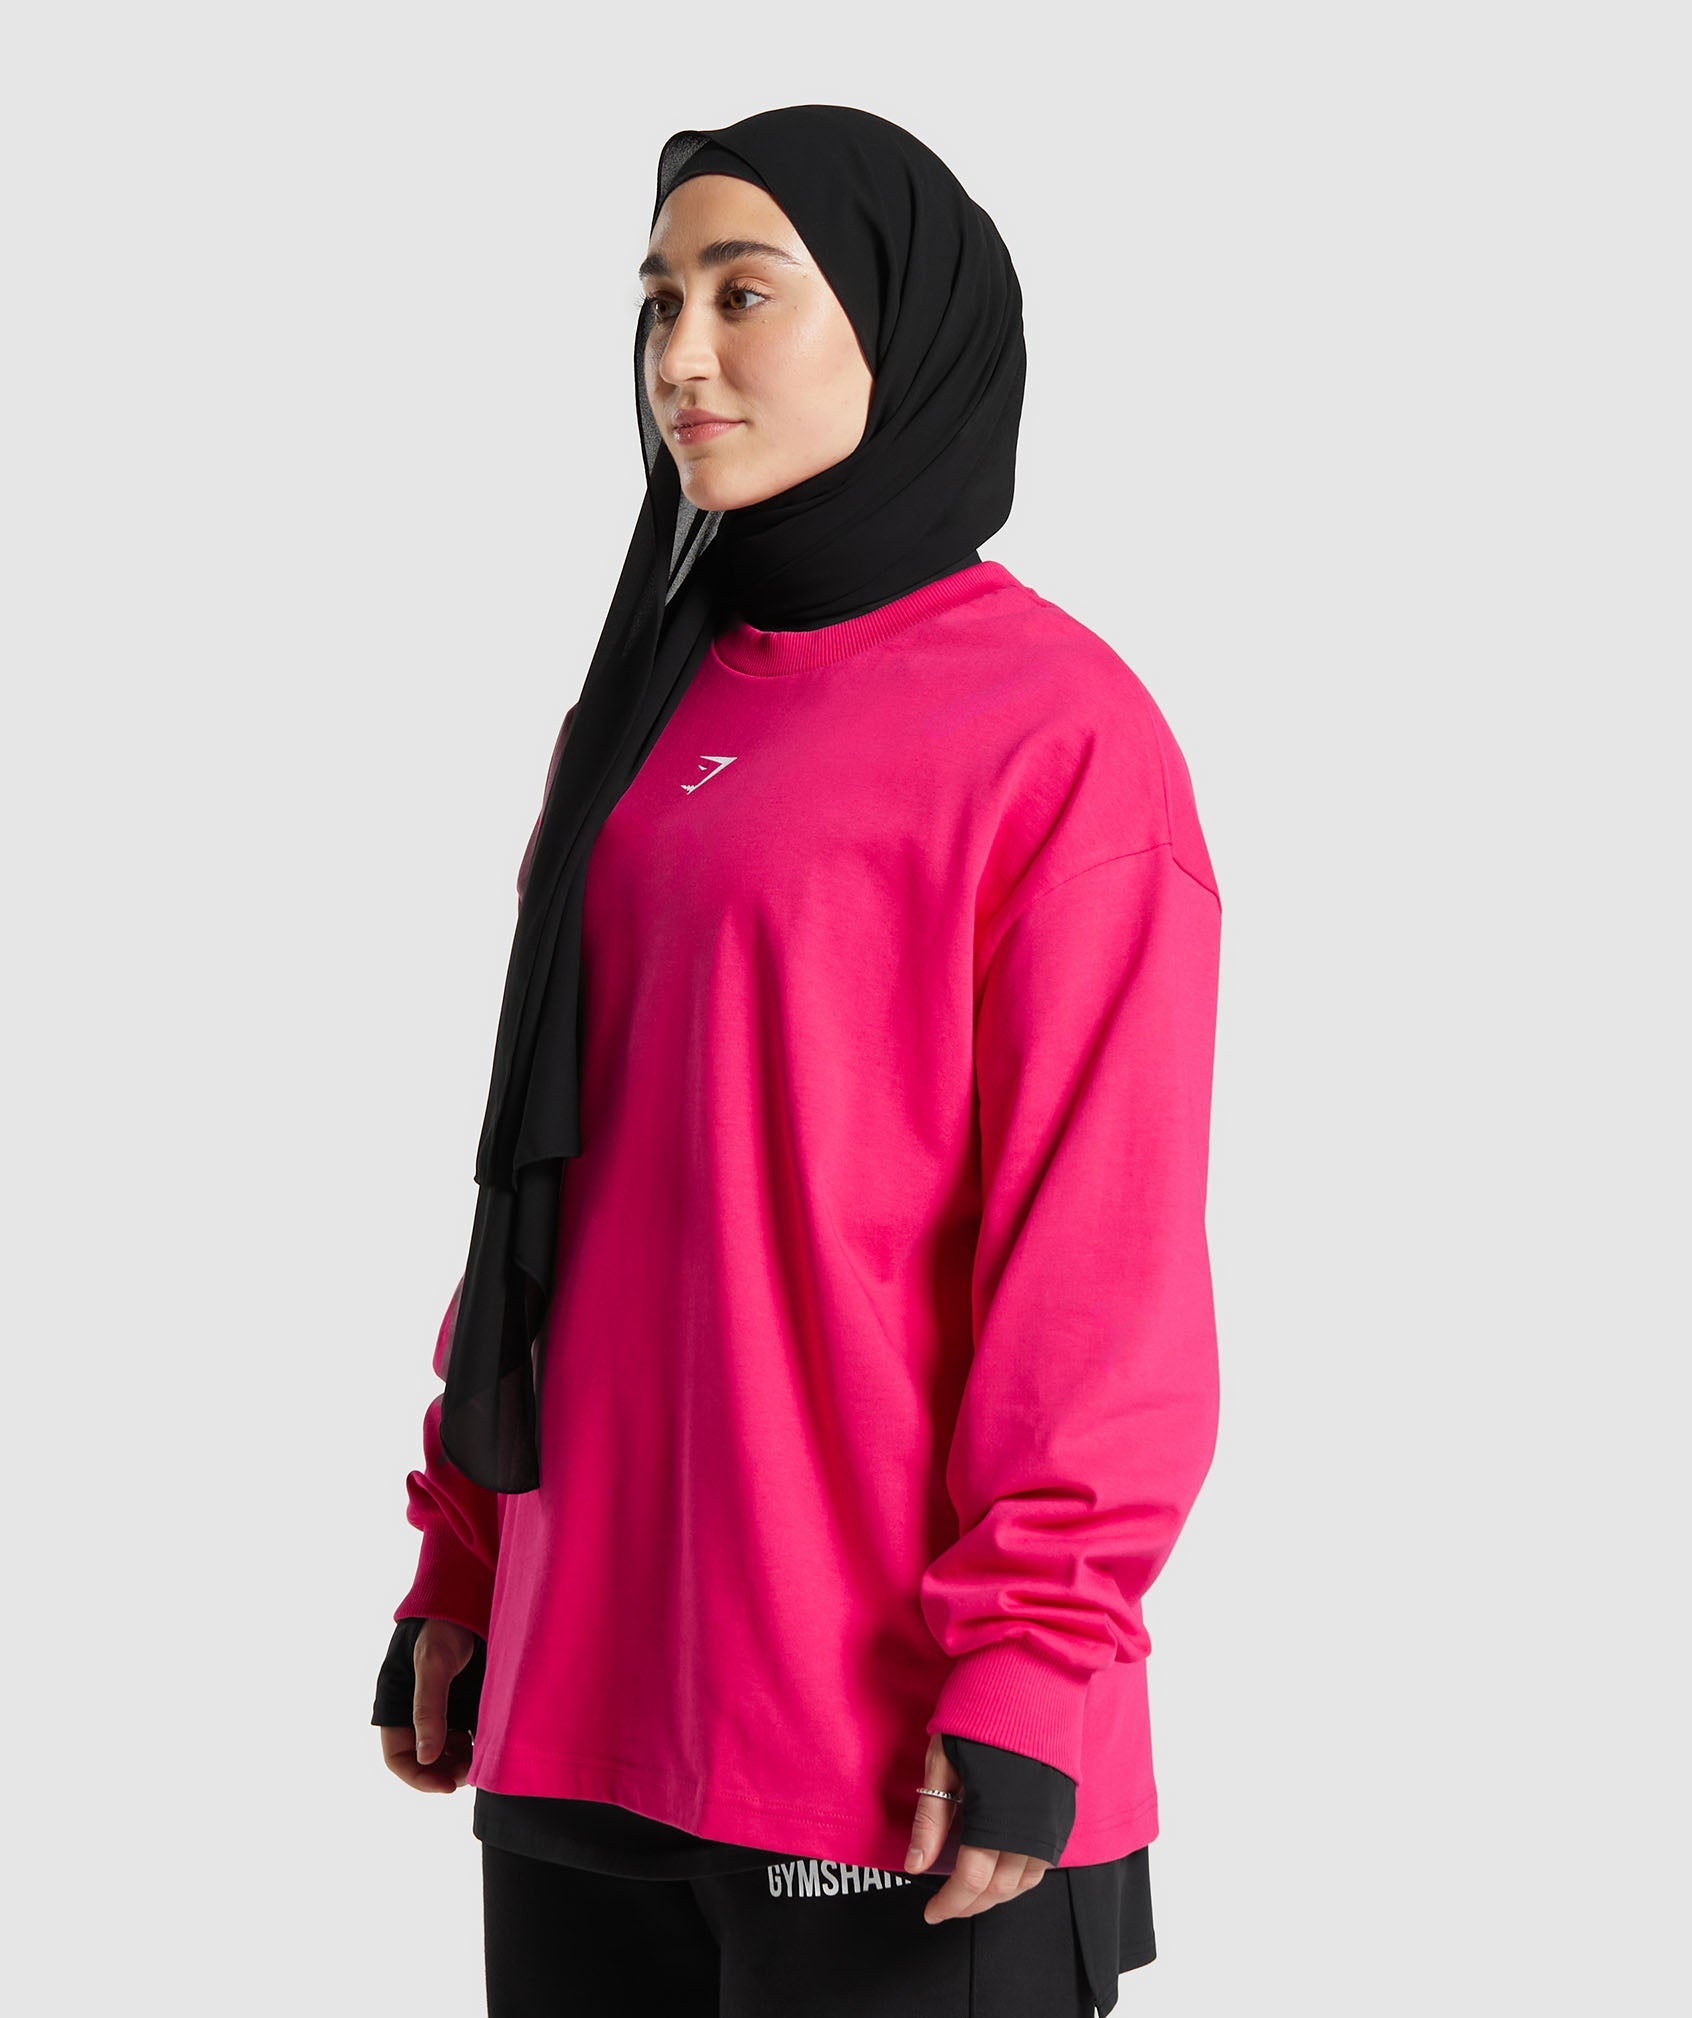 GS X Leana Deeb Graphic Oversized Long Sleeve Top in Impact Pink - view 3